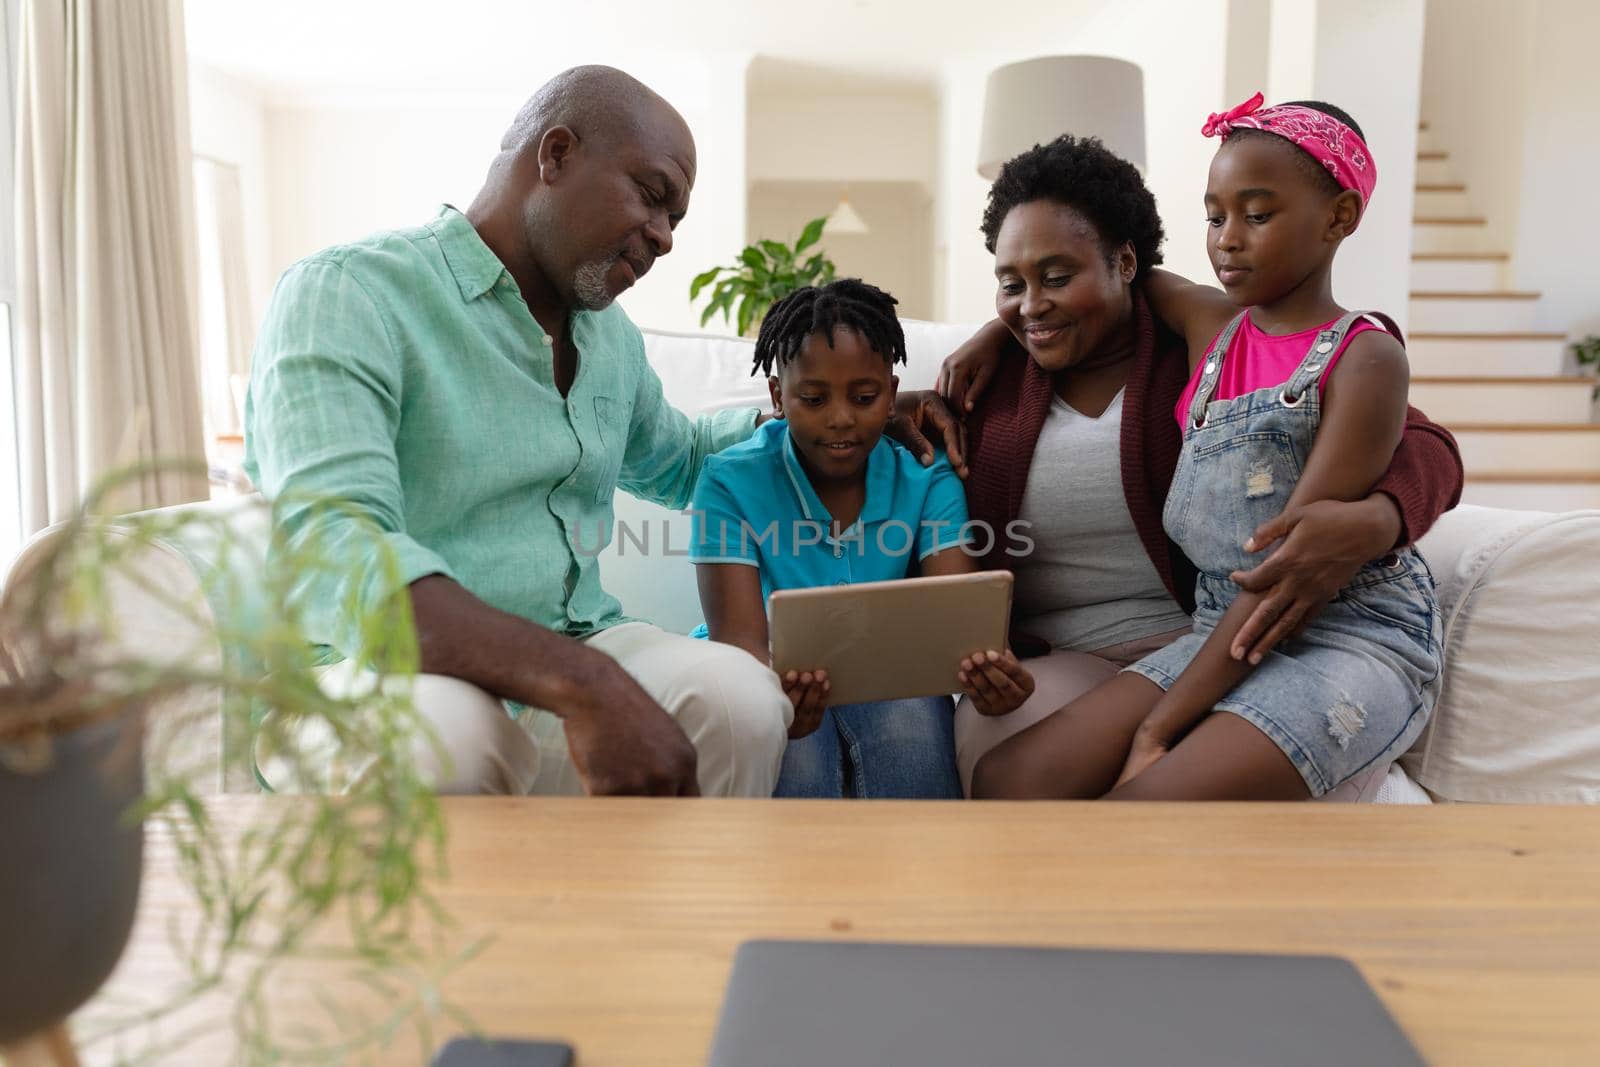 Happy african american grandfather and grandmother on couch with grandchildren looking at tablet. happy family spending time together at home.